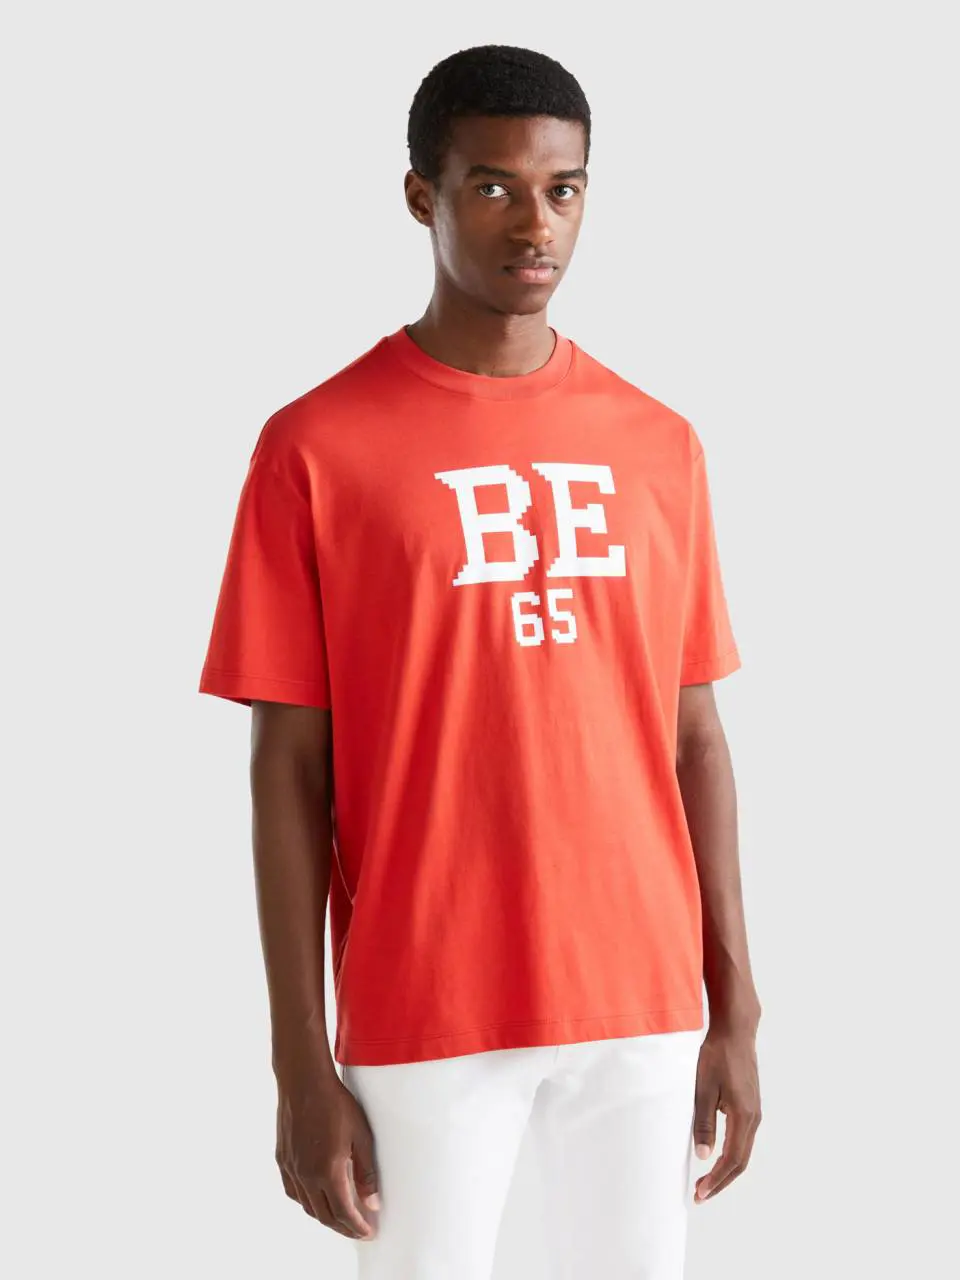 Benetton red t-shirt with "be" print. 1